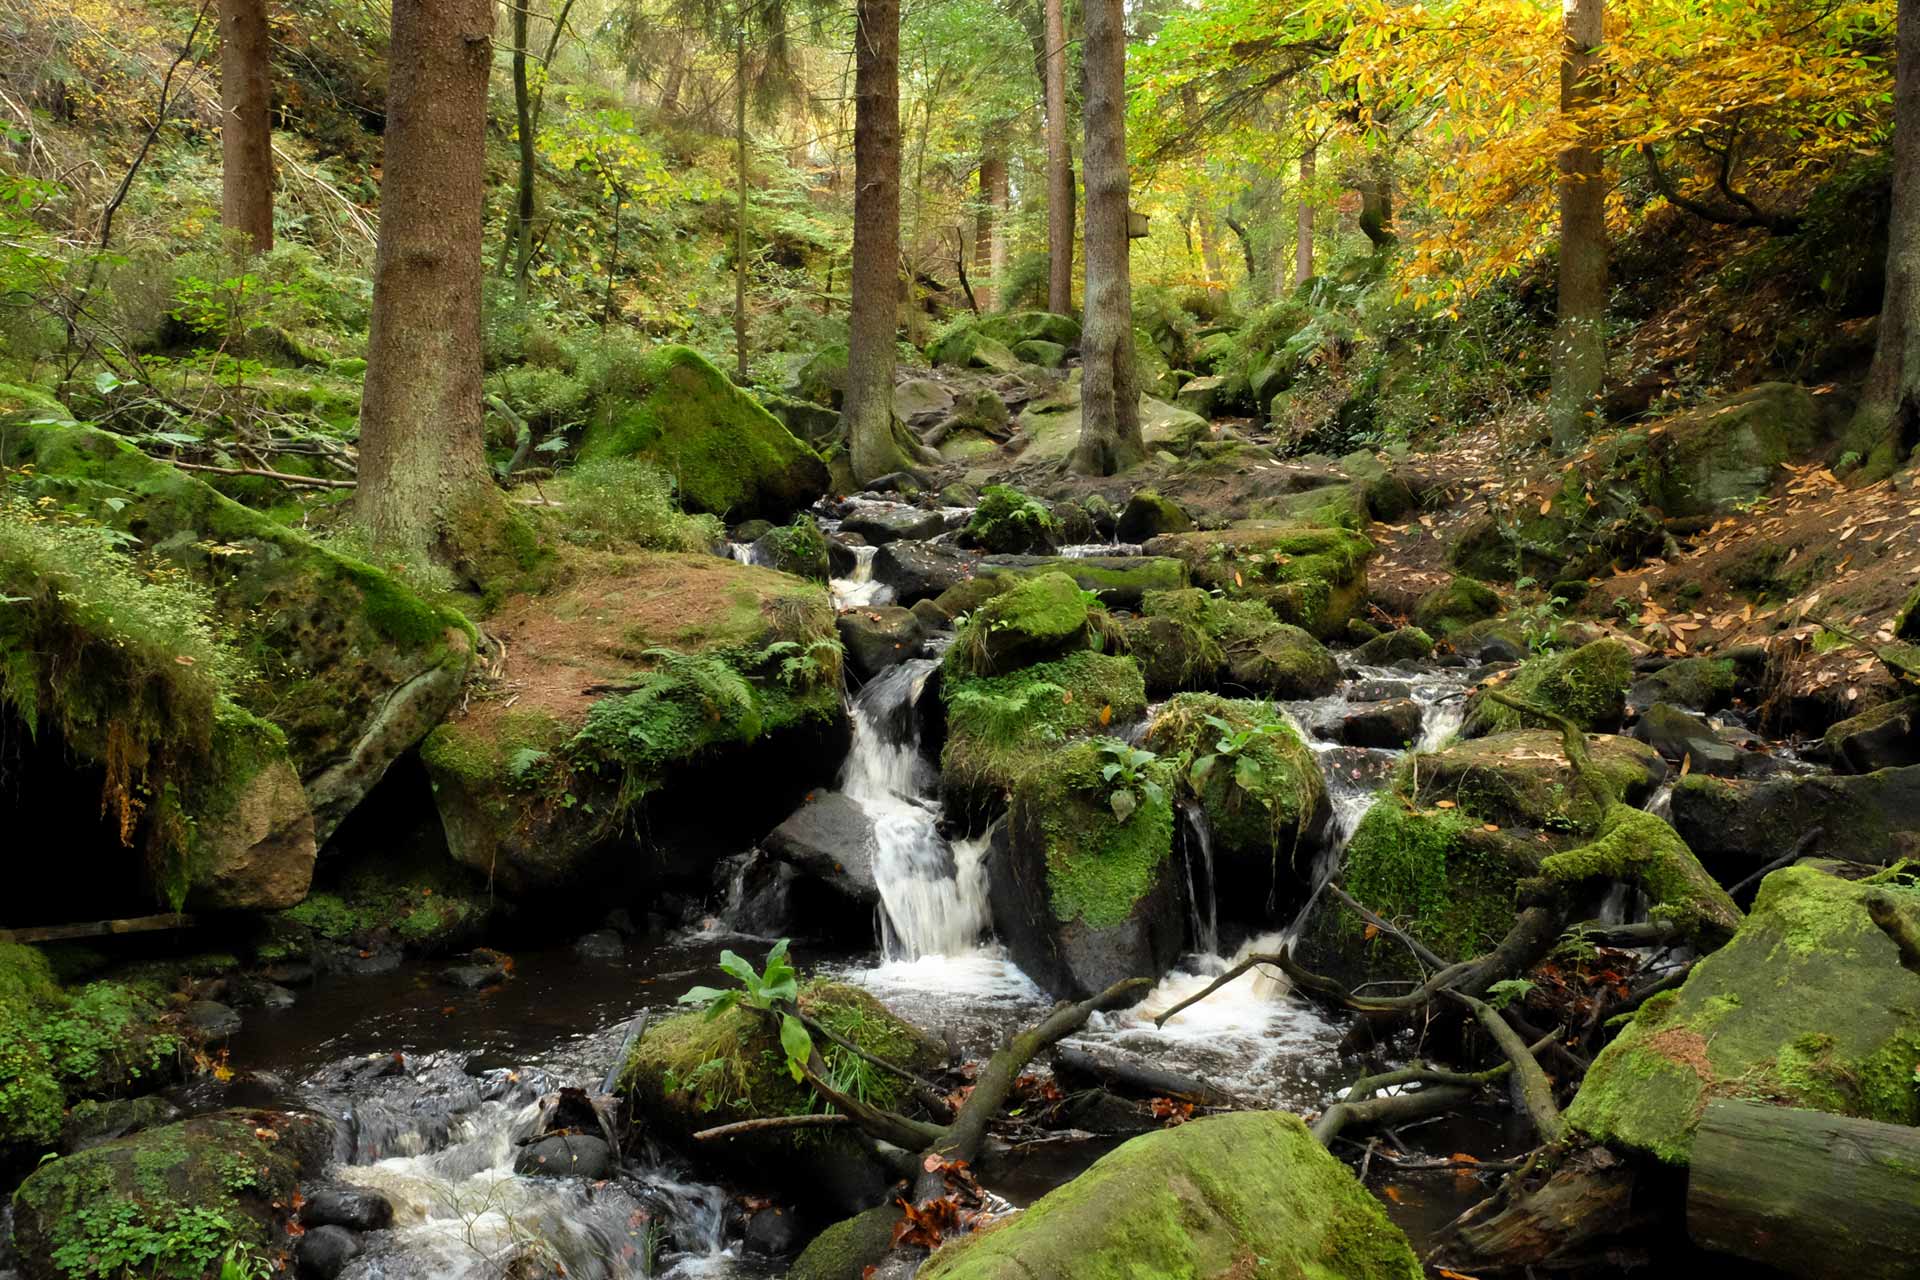 A brook tumbles over rocks in an autumn woodland